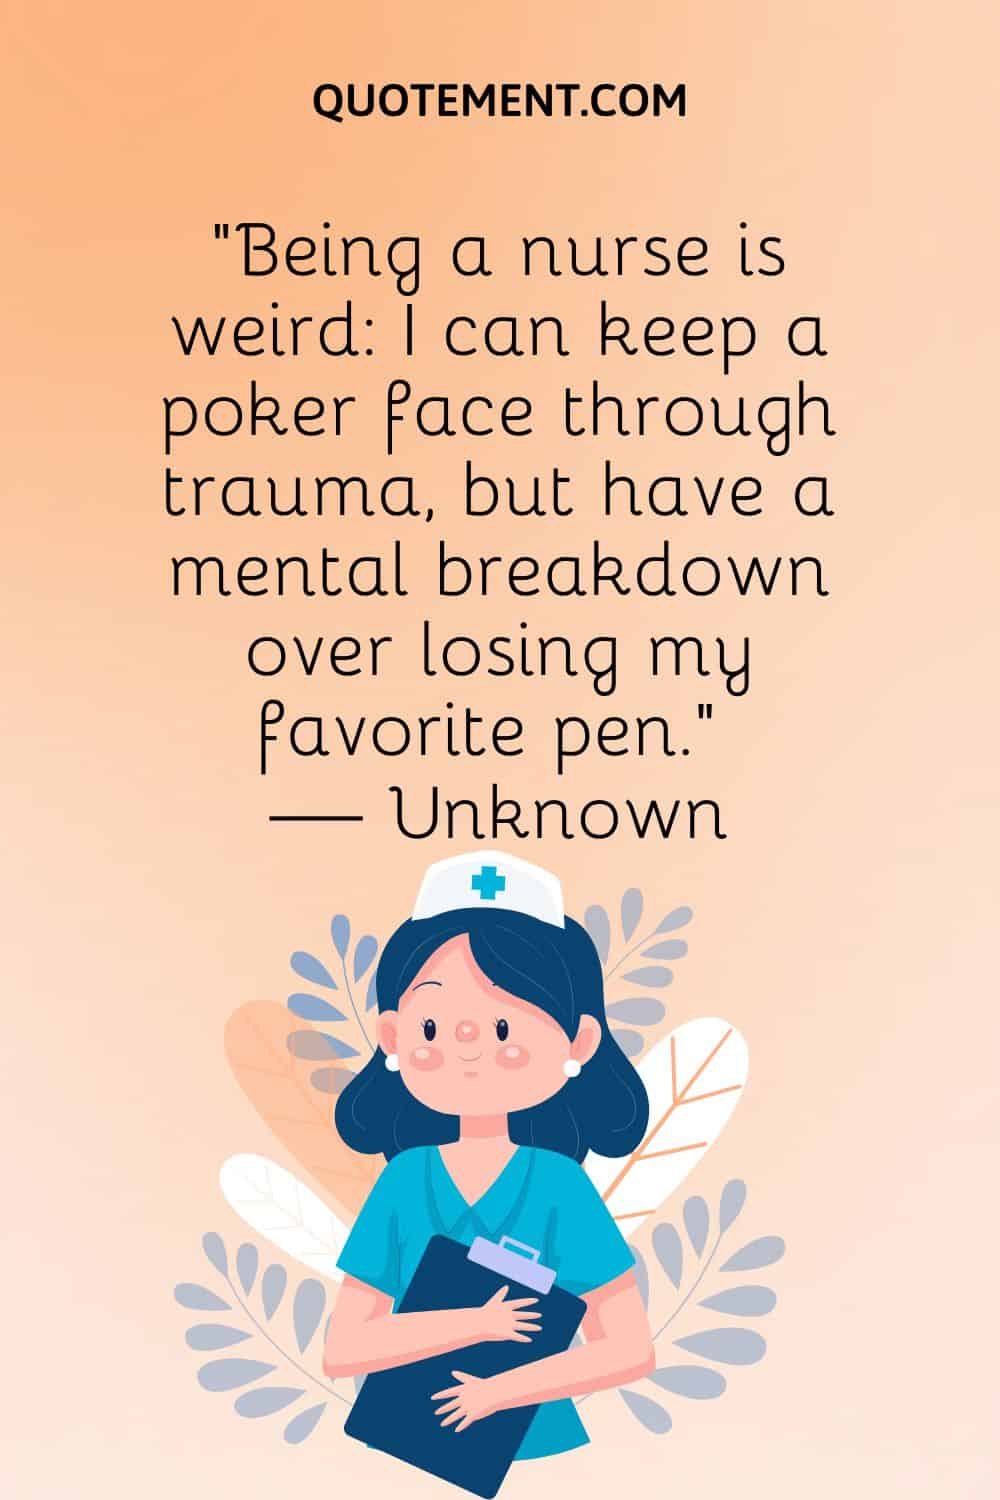 “Being a nurse is weird I can keep a poker face through trauma, but have a mental breakdown over losing my favorite pen.” — Unknown